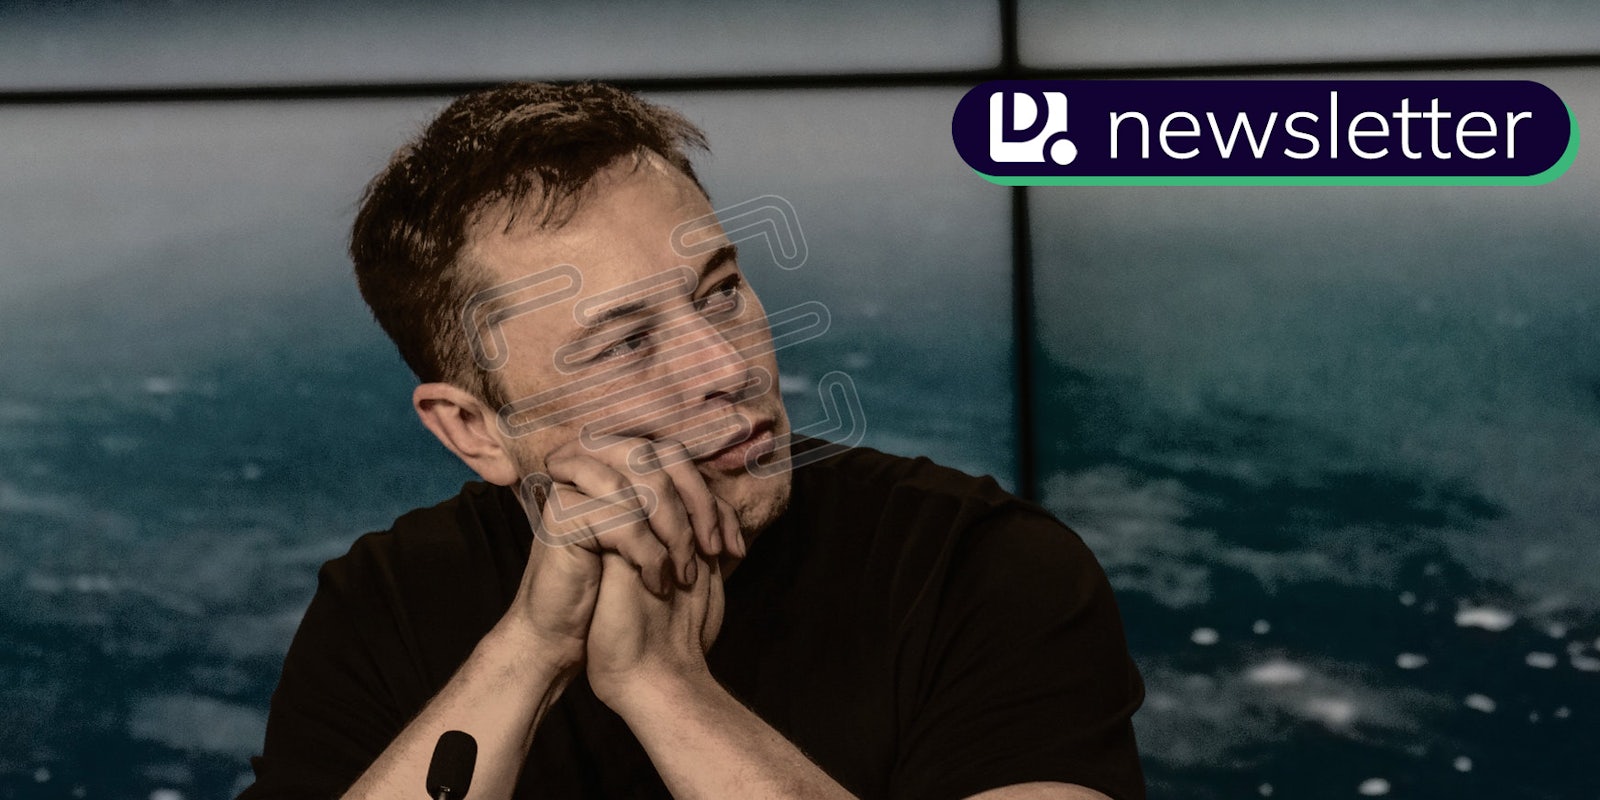 Elon Musk with a scan icon over his face. In the top right corner is the Daily Dot newsletter logo.